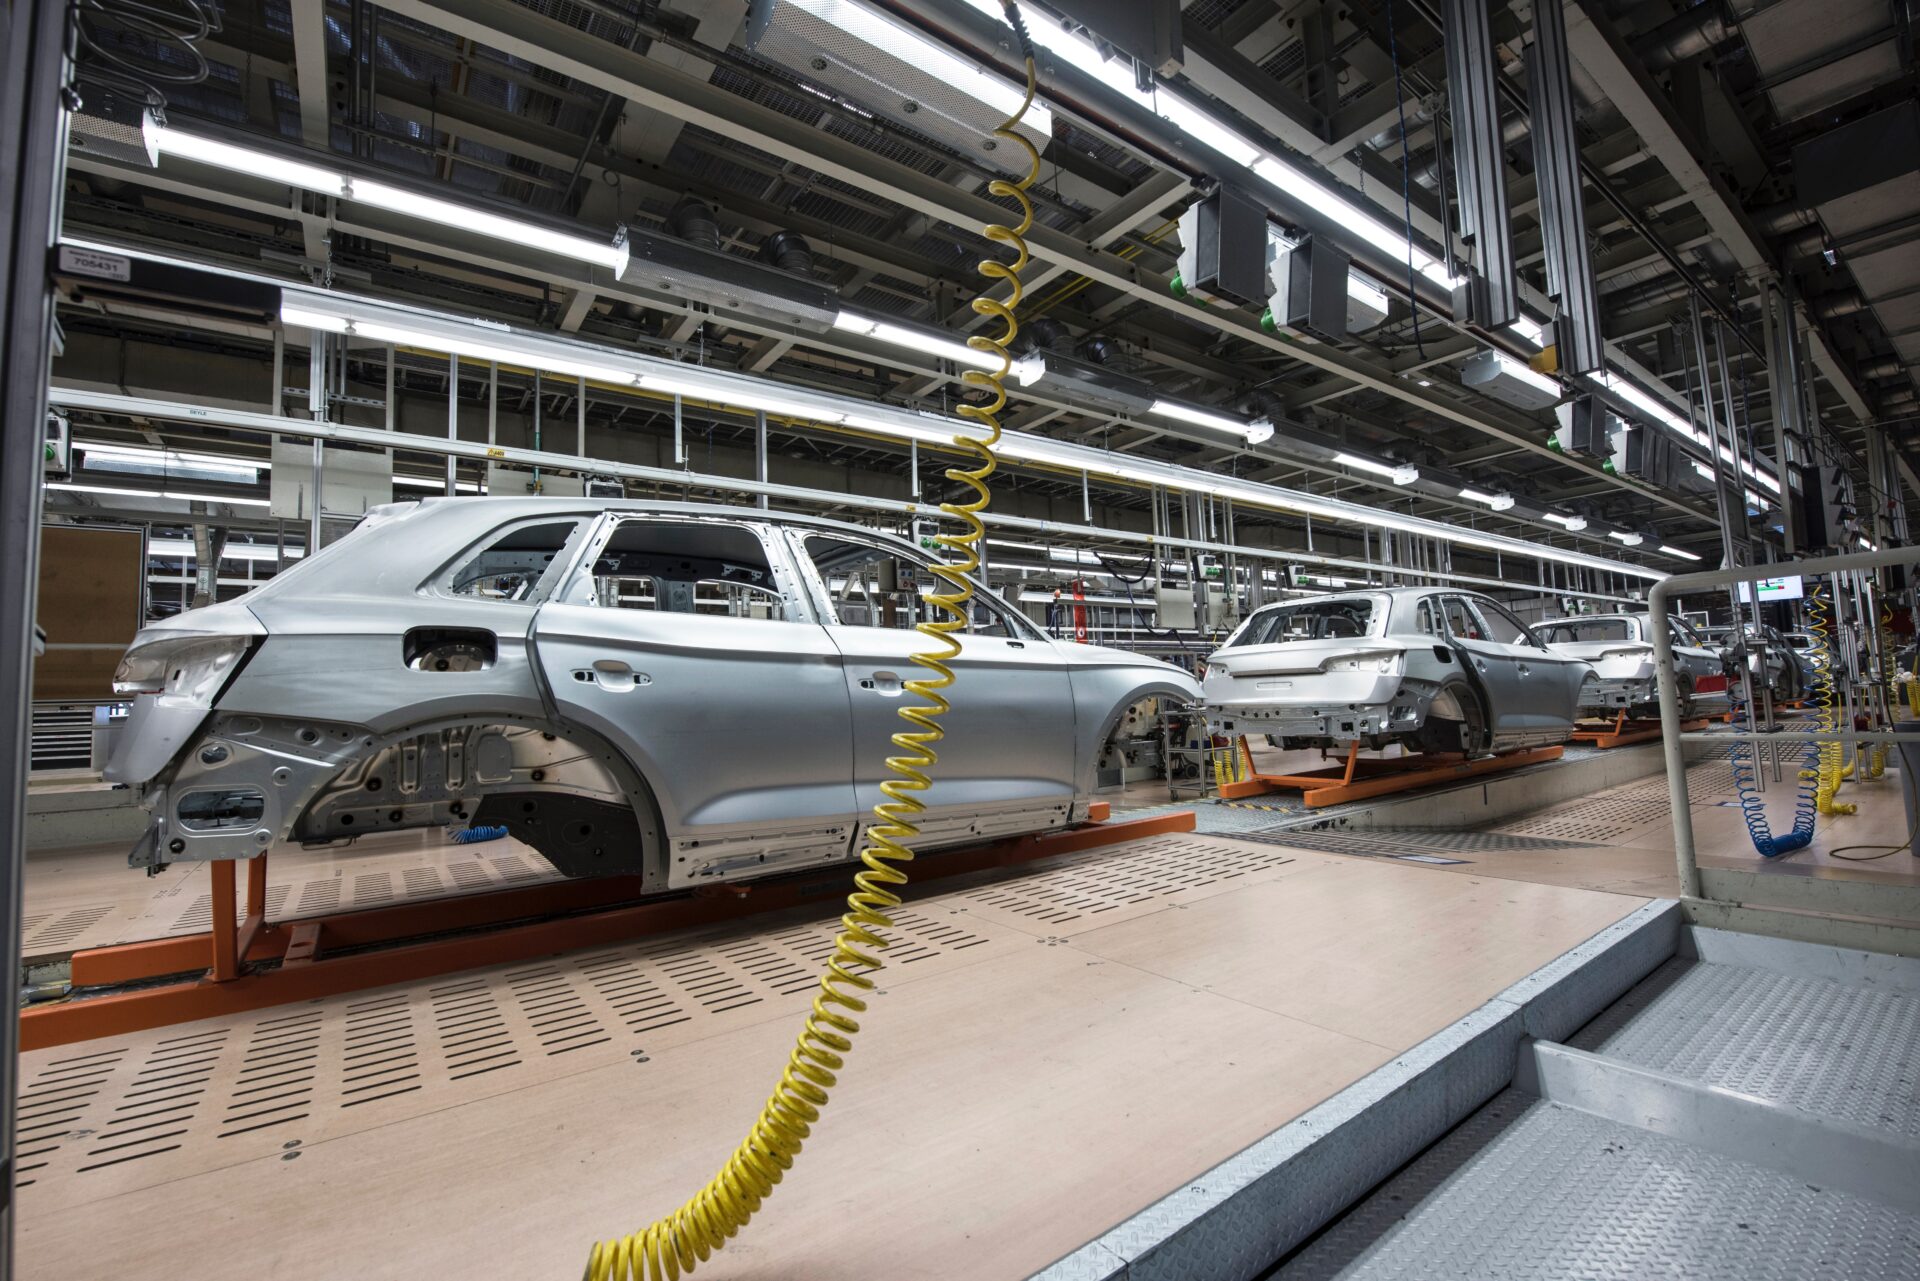 manufacturing cars in warehouse building a car